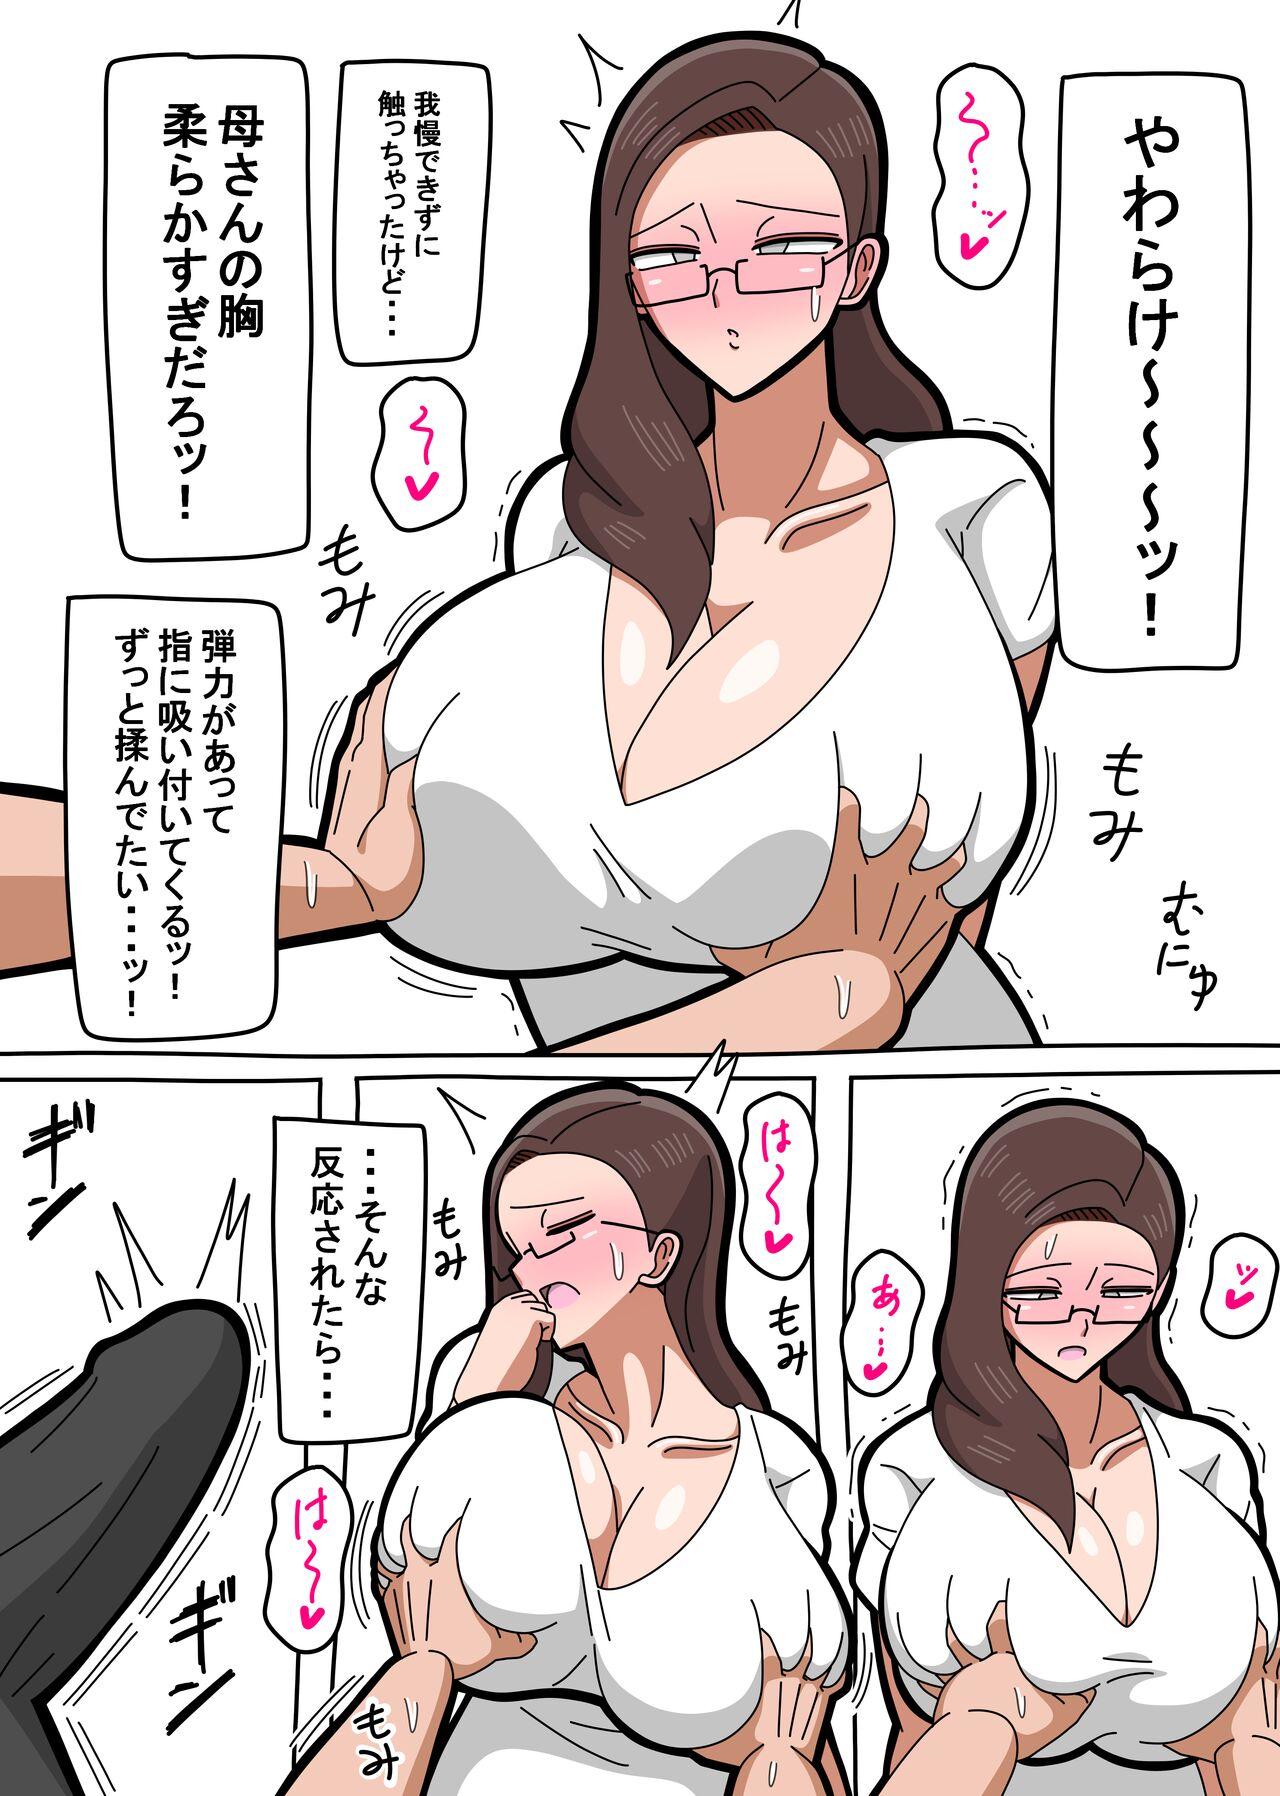 Fetish 母さんは女社長 - Original Reversecowgirl - Page 8